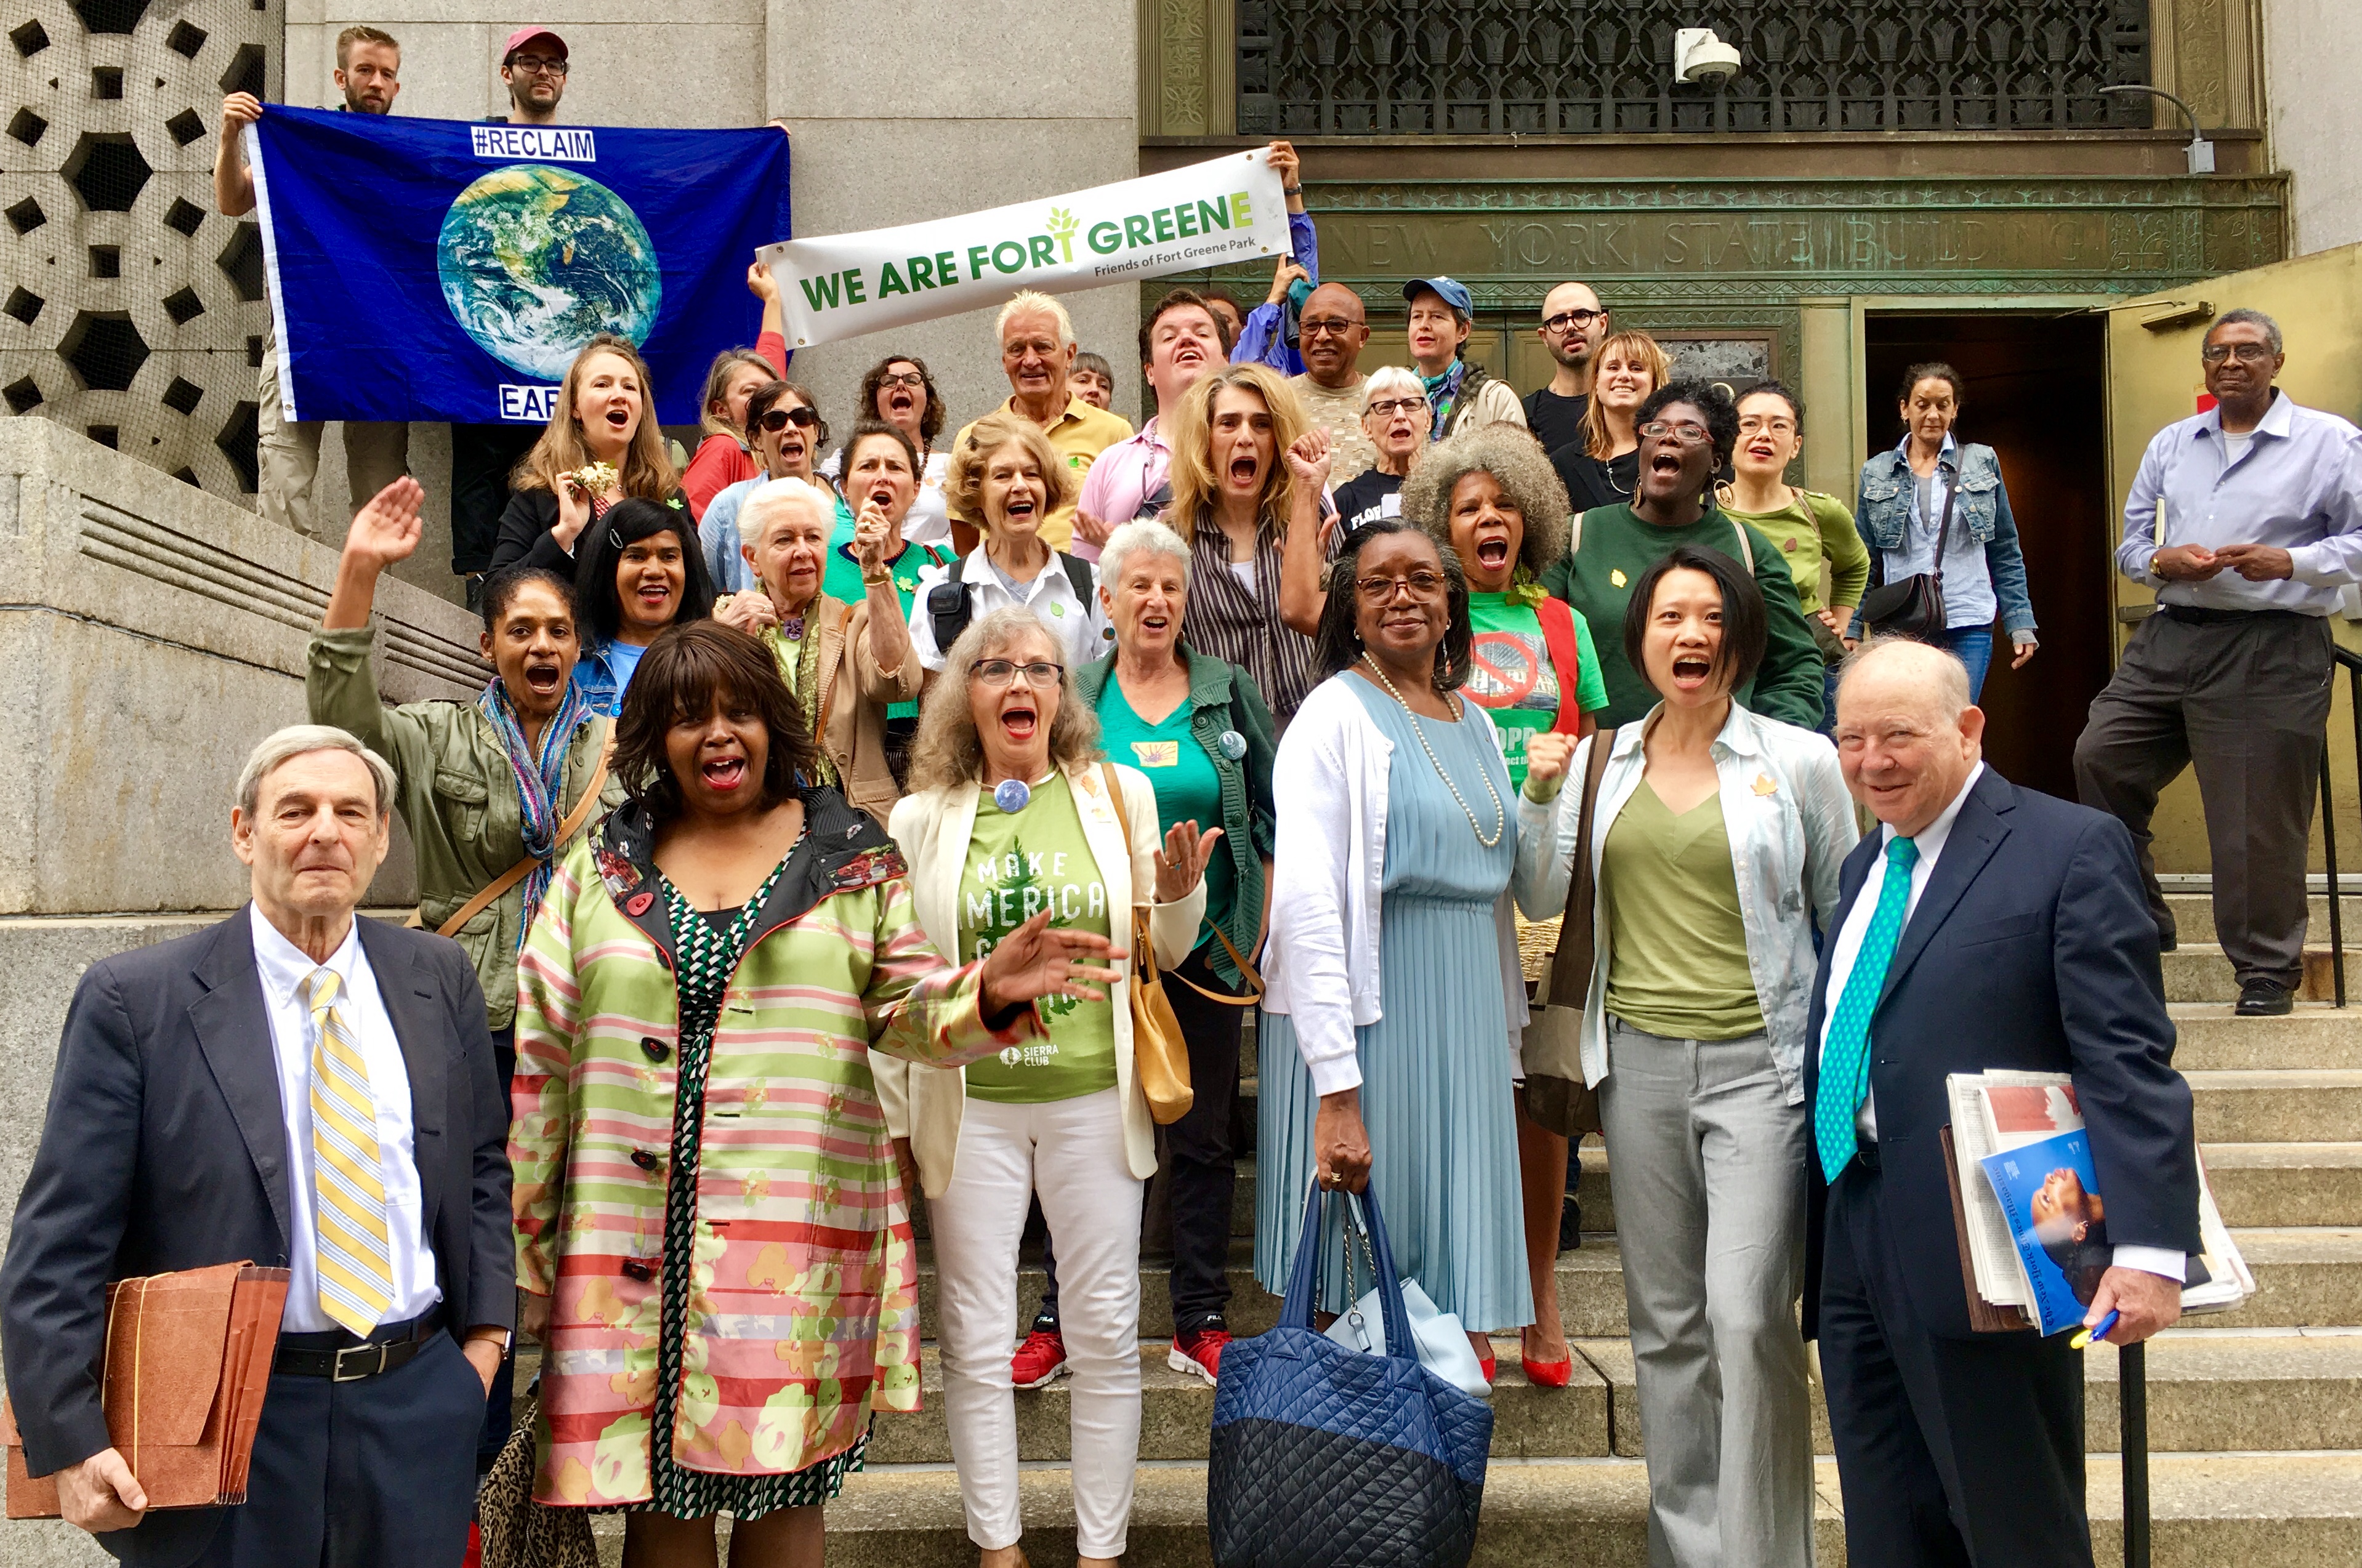 Brooklyn residents chant “Save our trees” on the steps of New York Supreme Court. Eagle photo by Lore Croghan